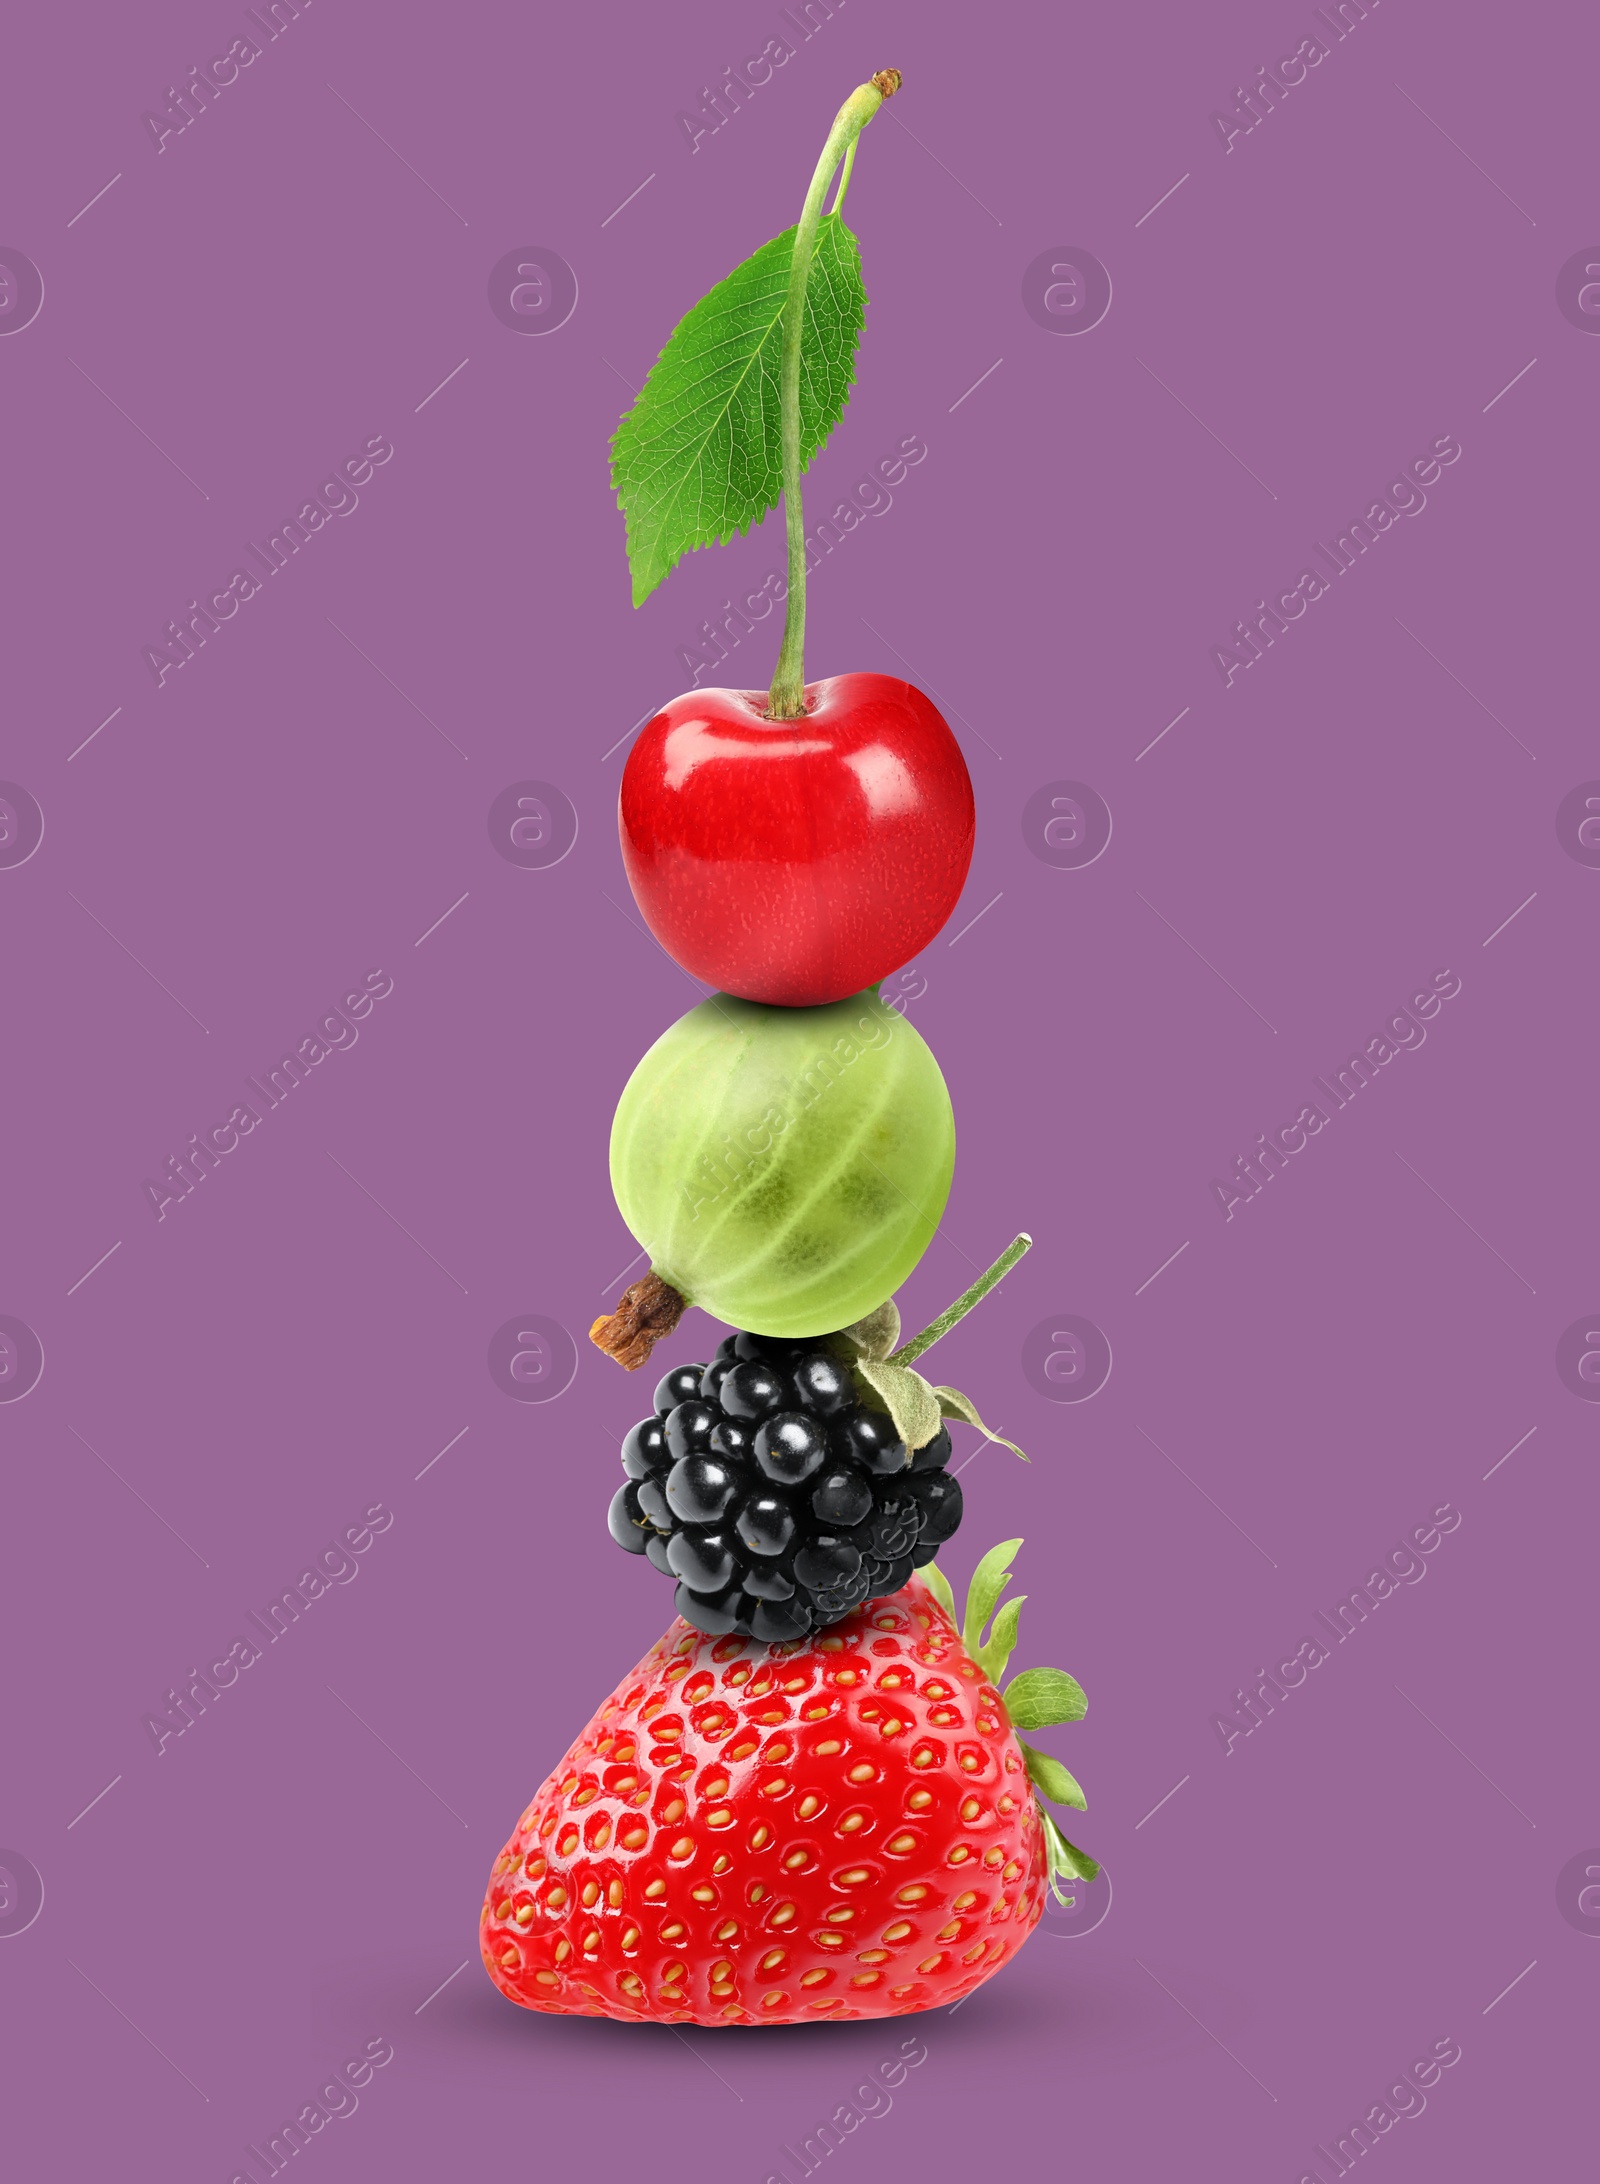 Image of Stack of different fresh tasty berries and cherry on pale purple background